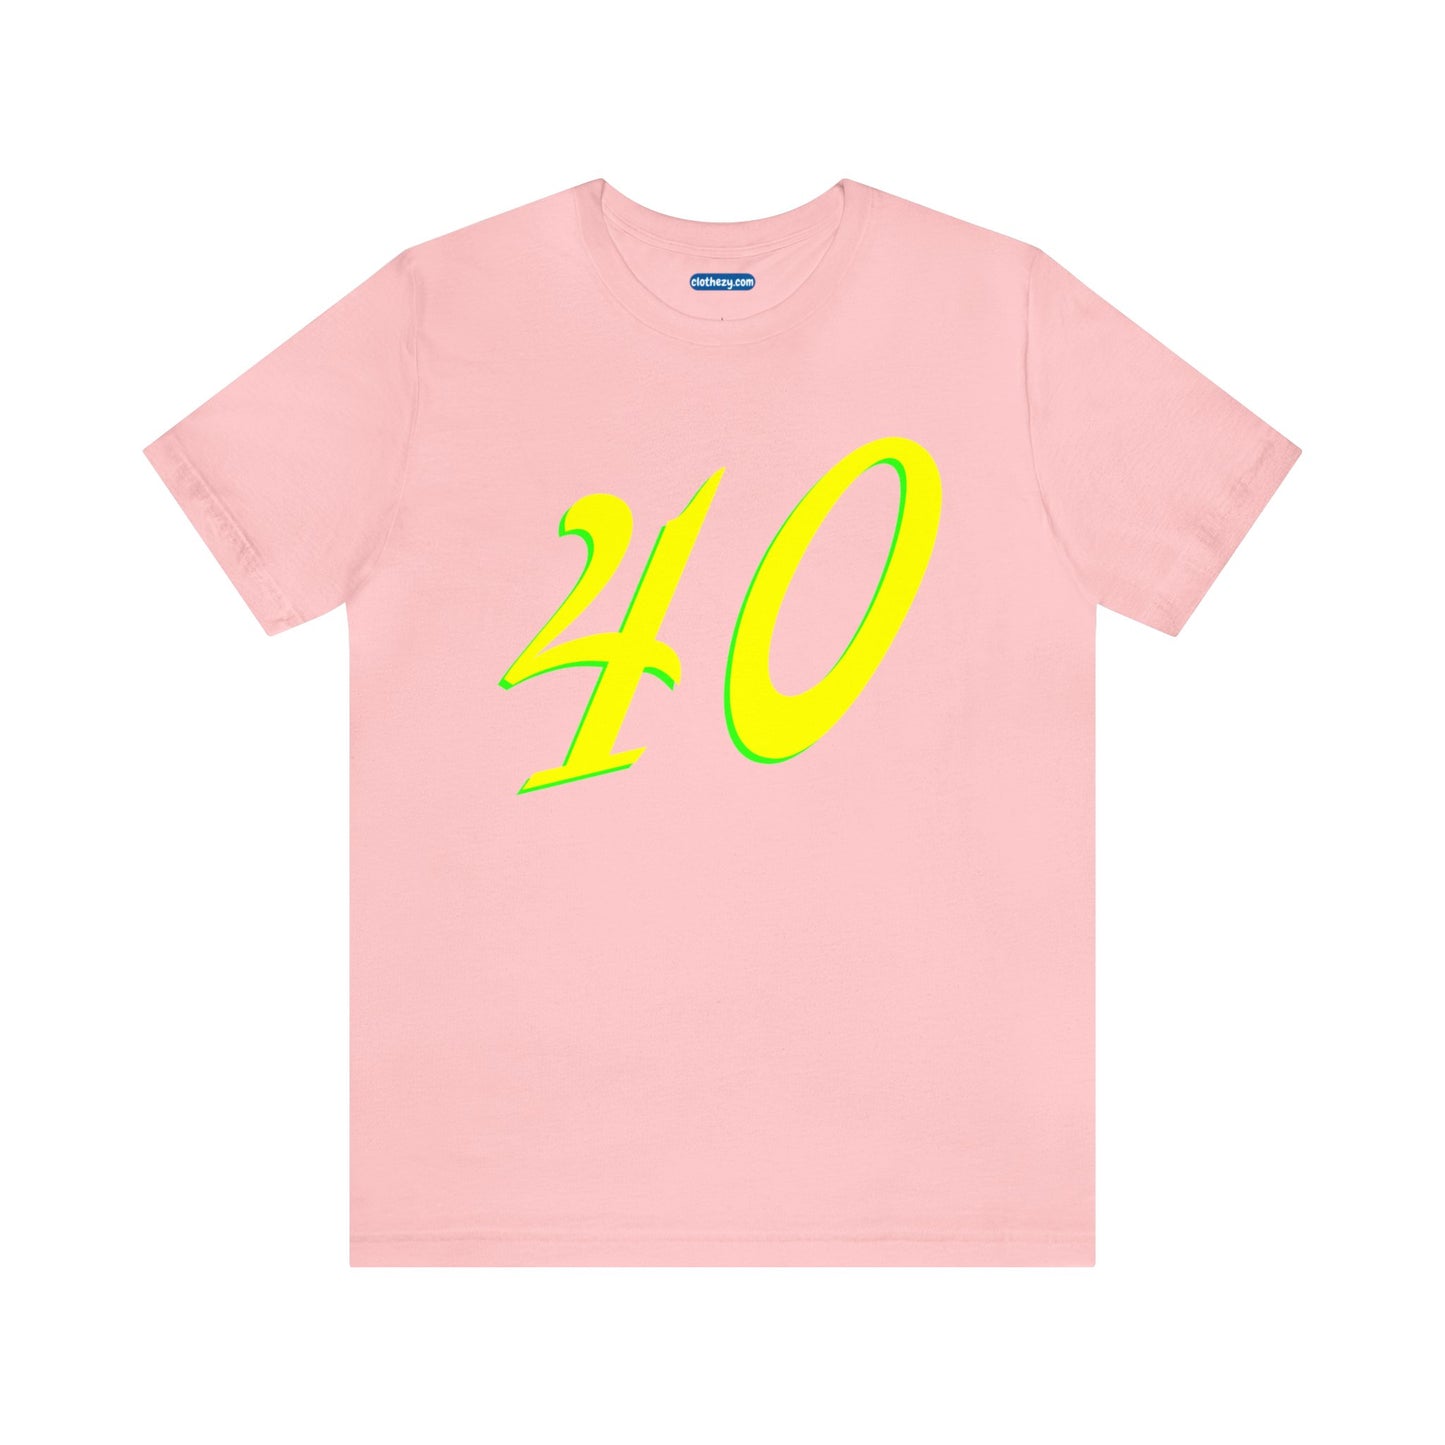 Number 40 Design - Soft Cotton Tee for birthdays and celebrations, Gift for friends and family, Multiple Options by clothezy.com in Pink Size Small - Buy Now